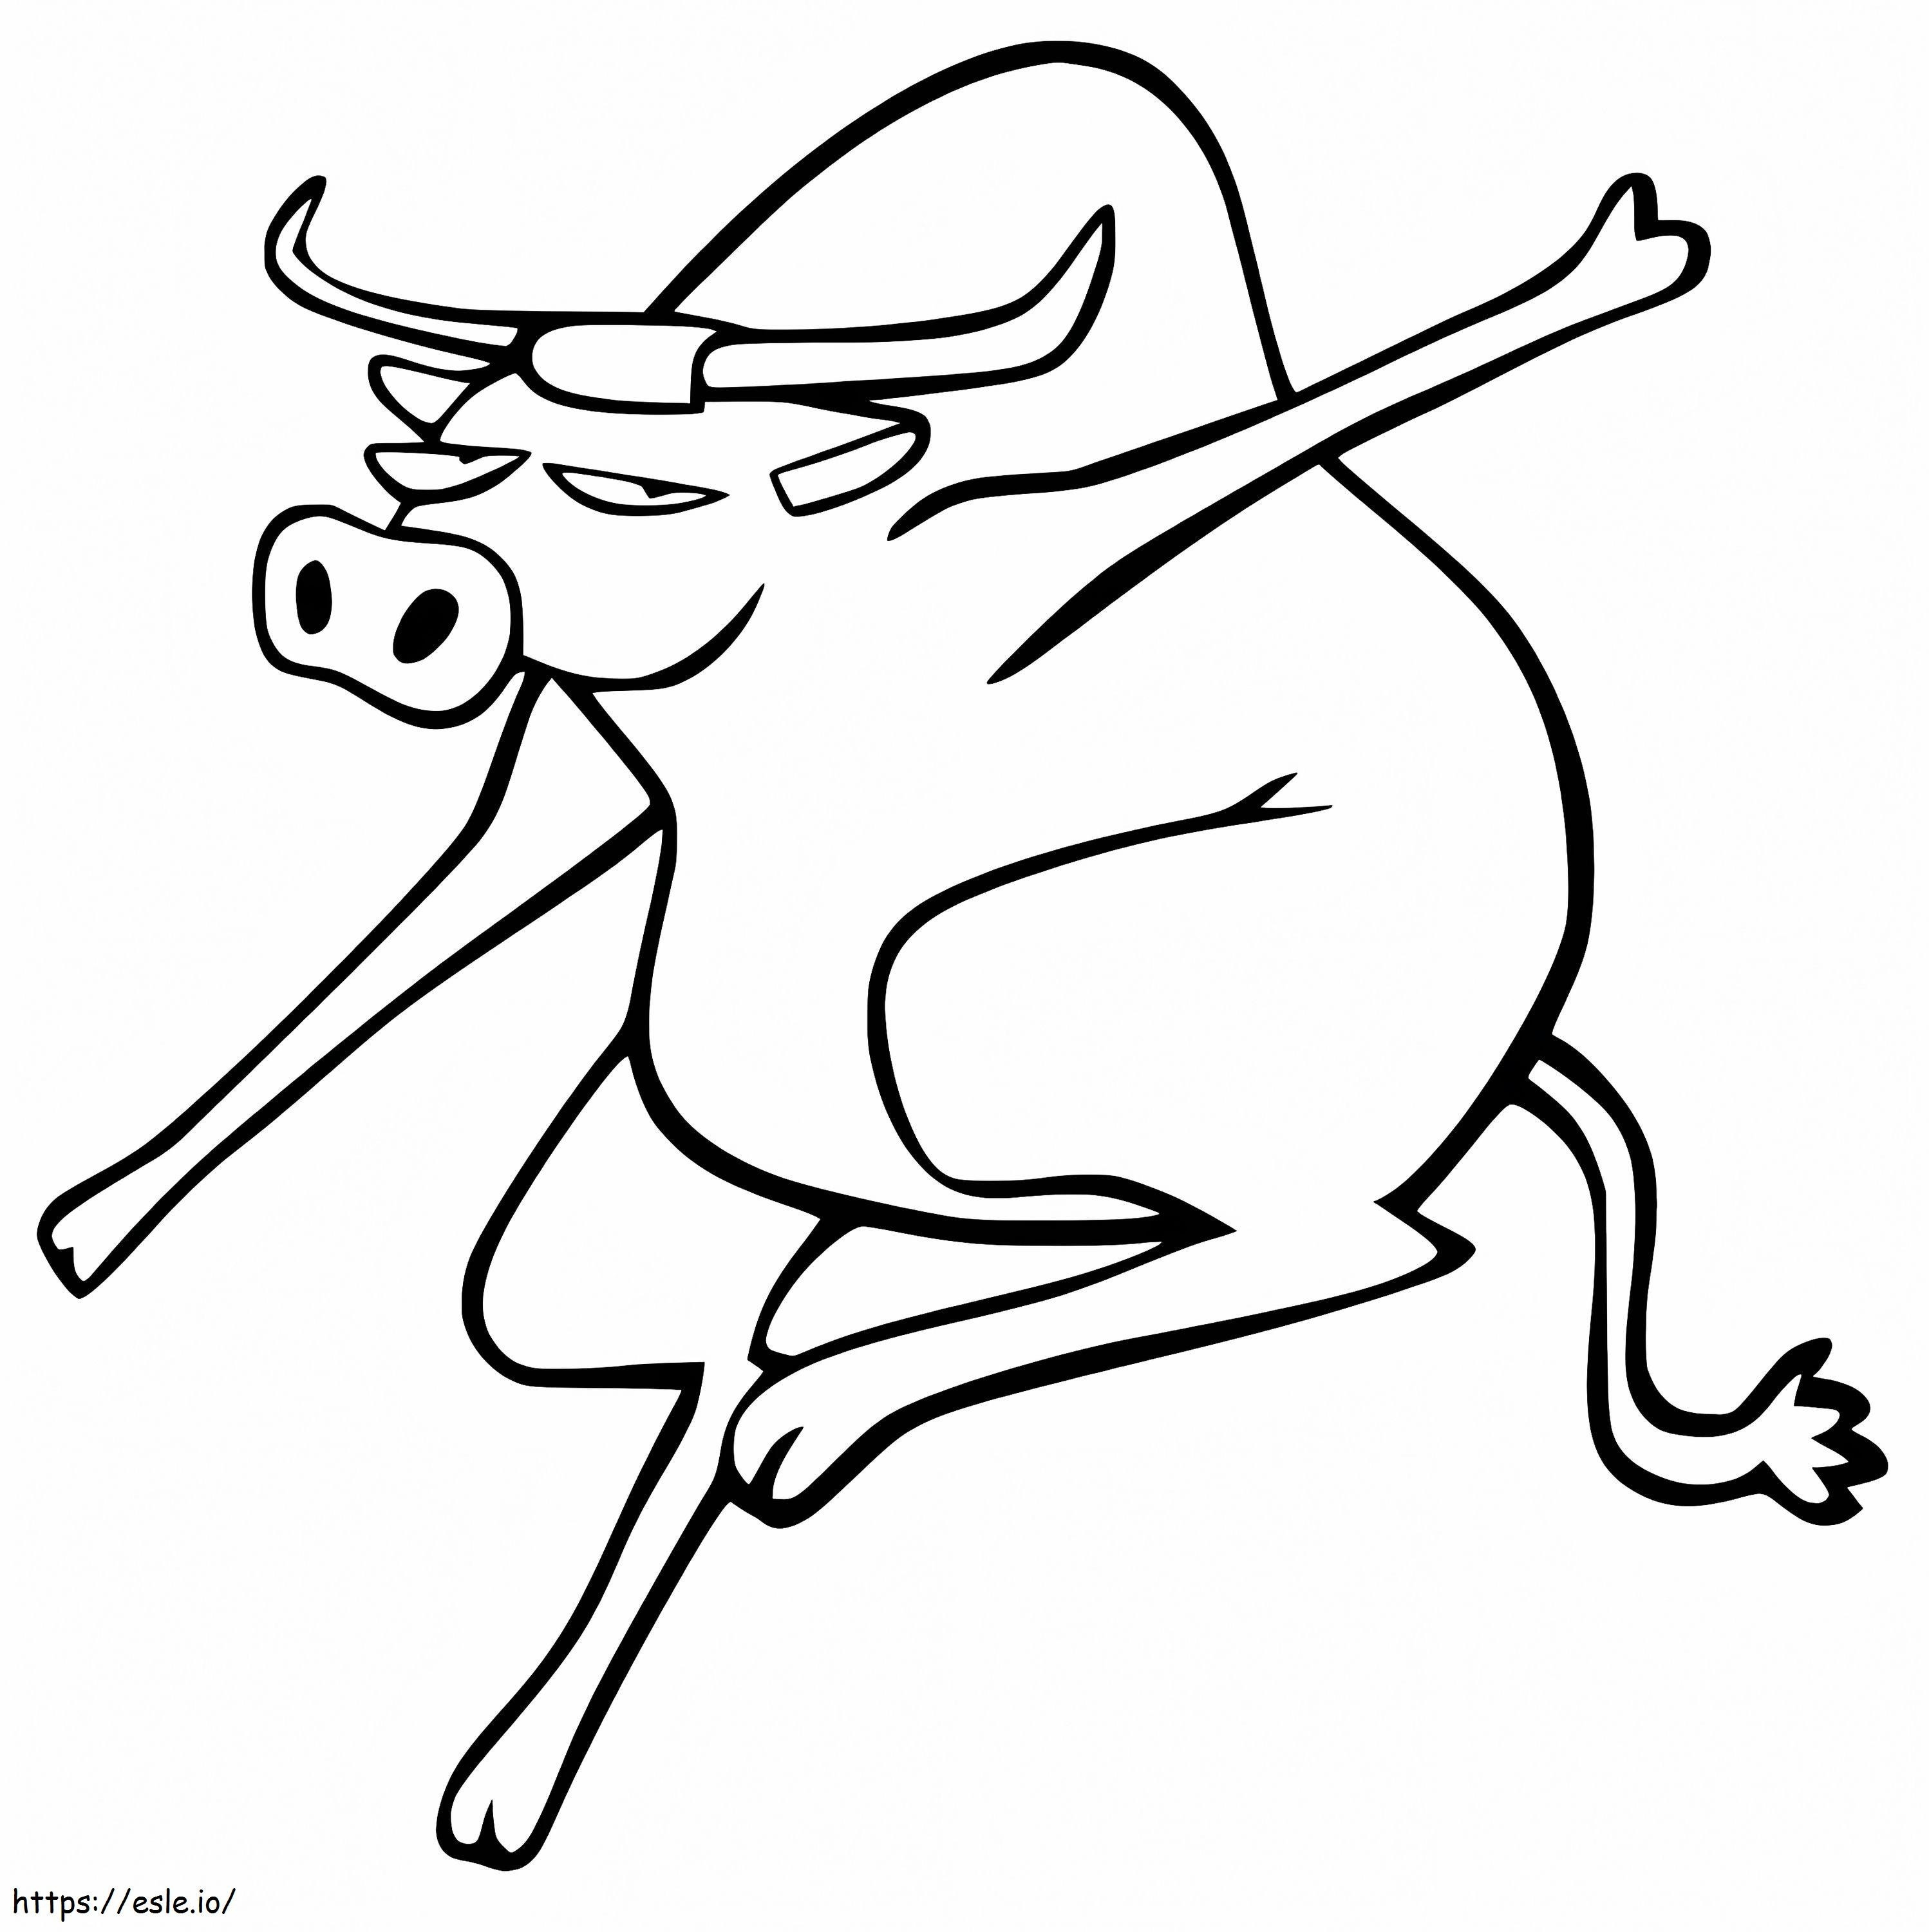 A Funny Ox coloring page